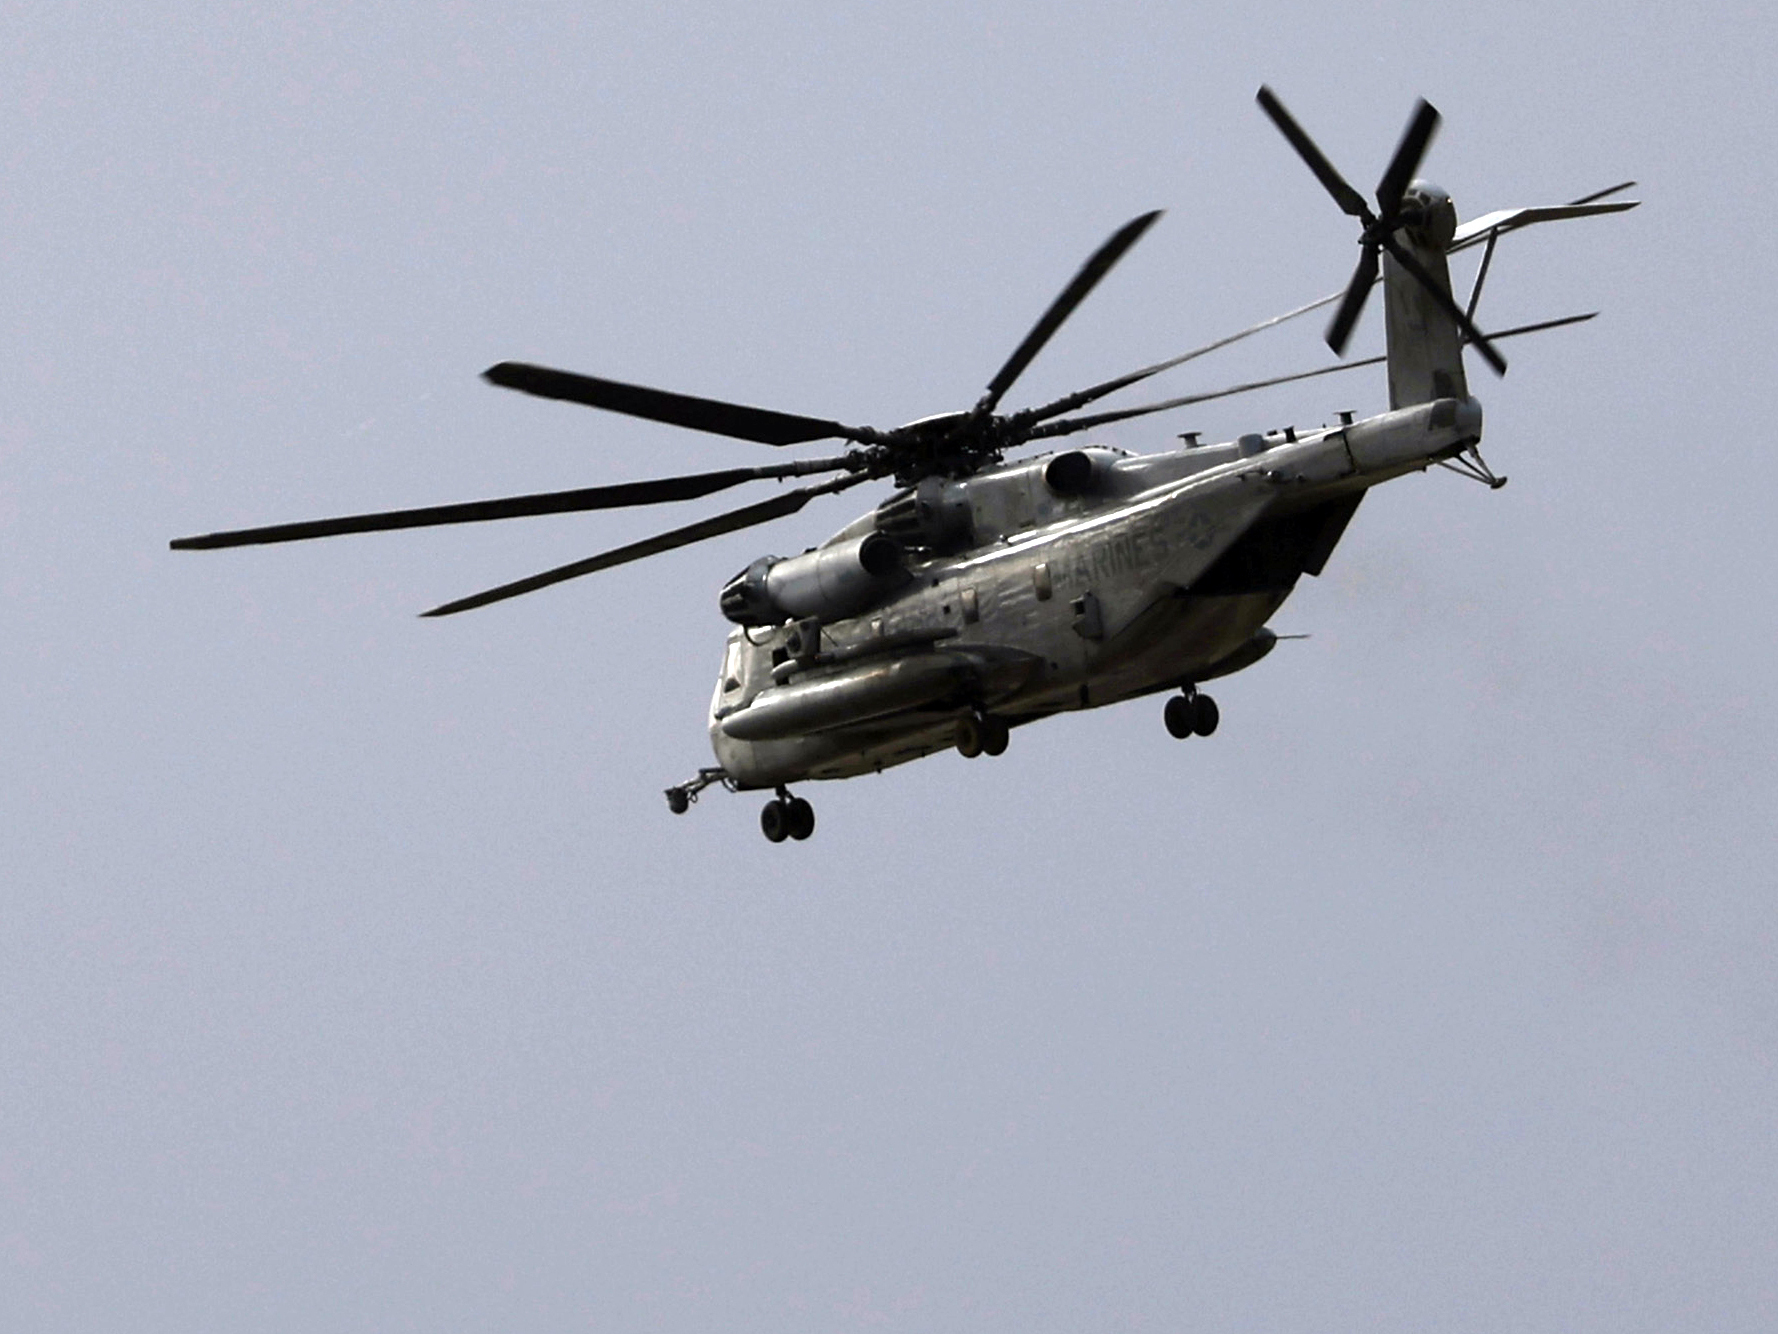 5 Marines died when their helicopter went down outside San Diego, the military says